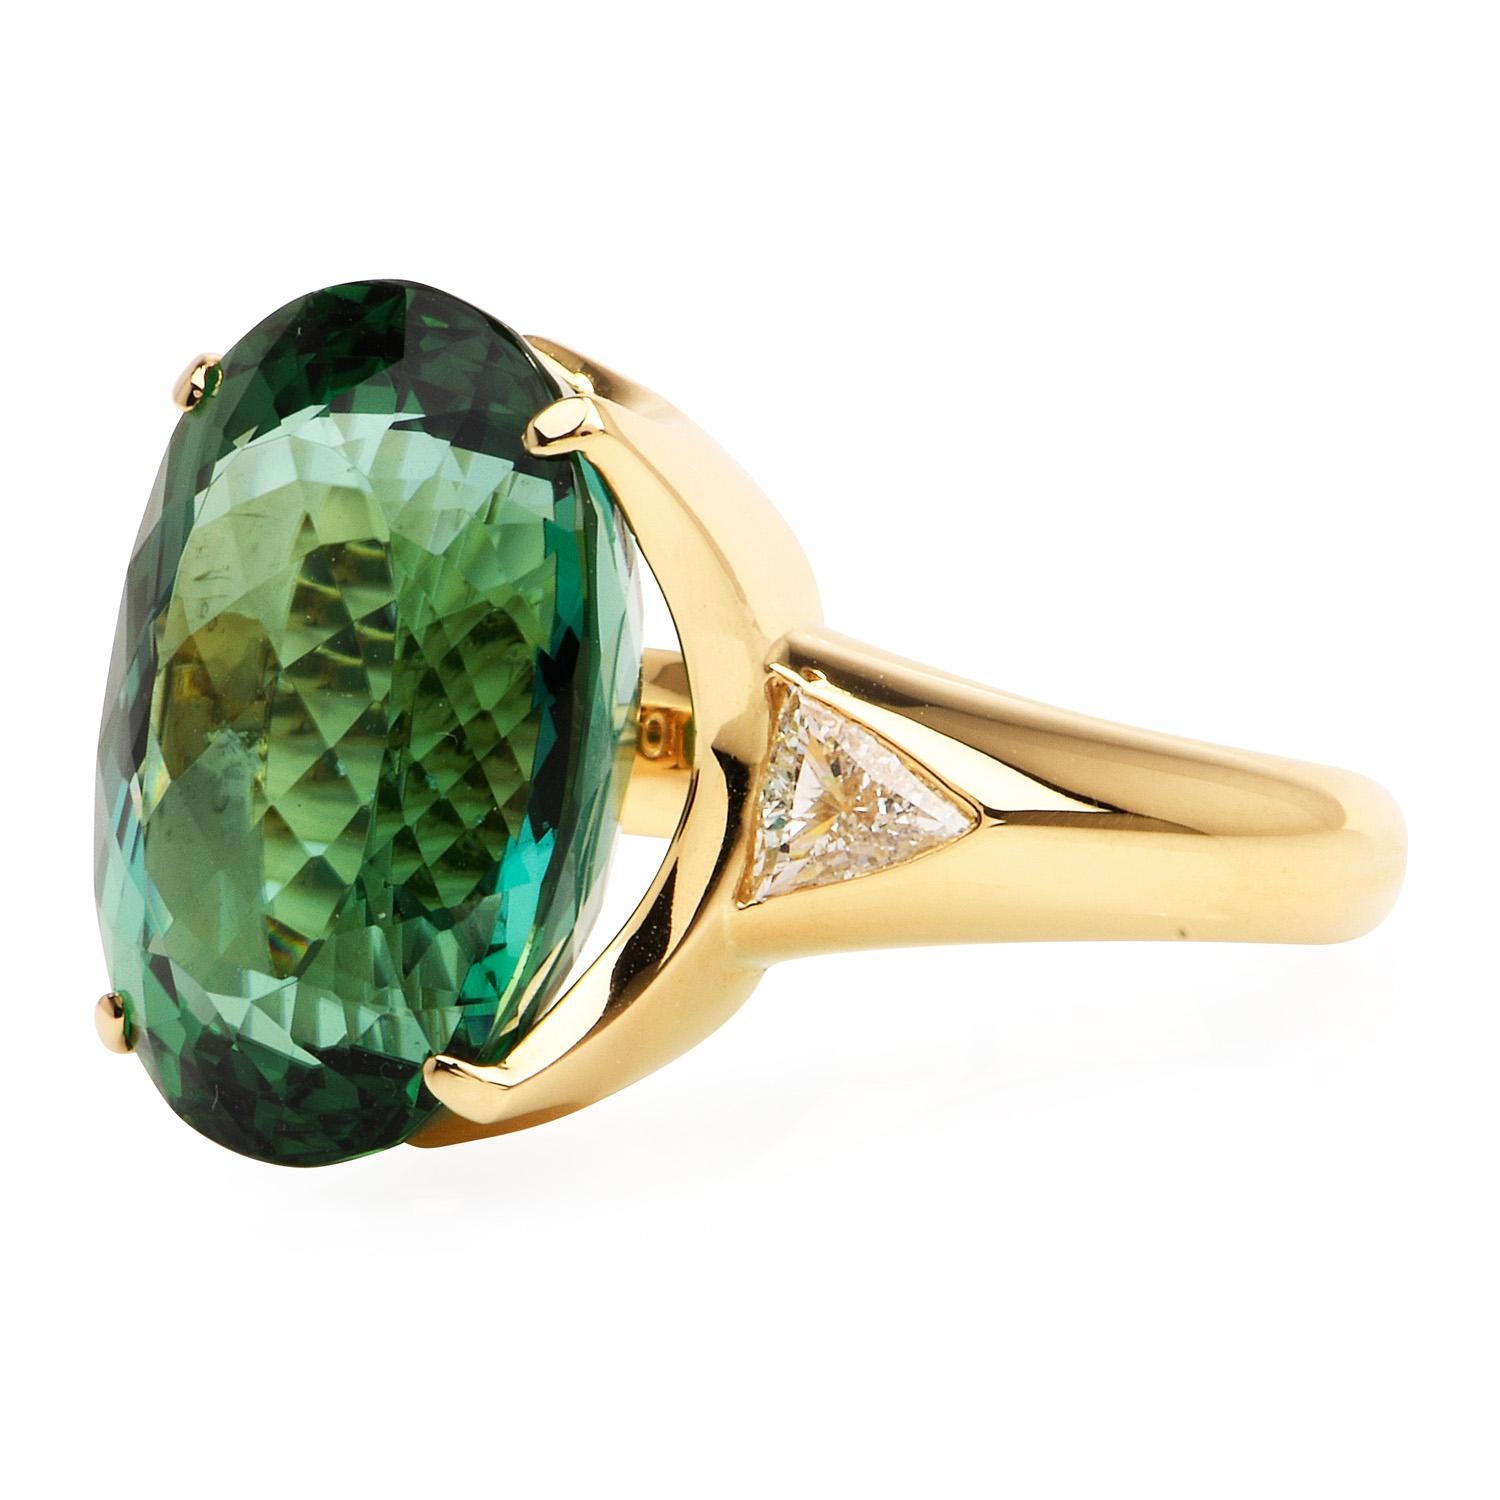 This exquisite Green Tourmaline Cocktail Ring is a splash of color with an effortless sparkle, Crafted in solid heavy 18K yellow gold, the center is adorned by a GIA certified Green Tourmaline, Oval cut, Prong-set, weighing approximately 19.42